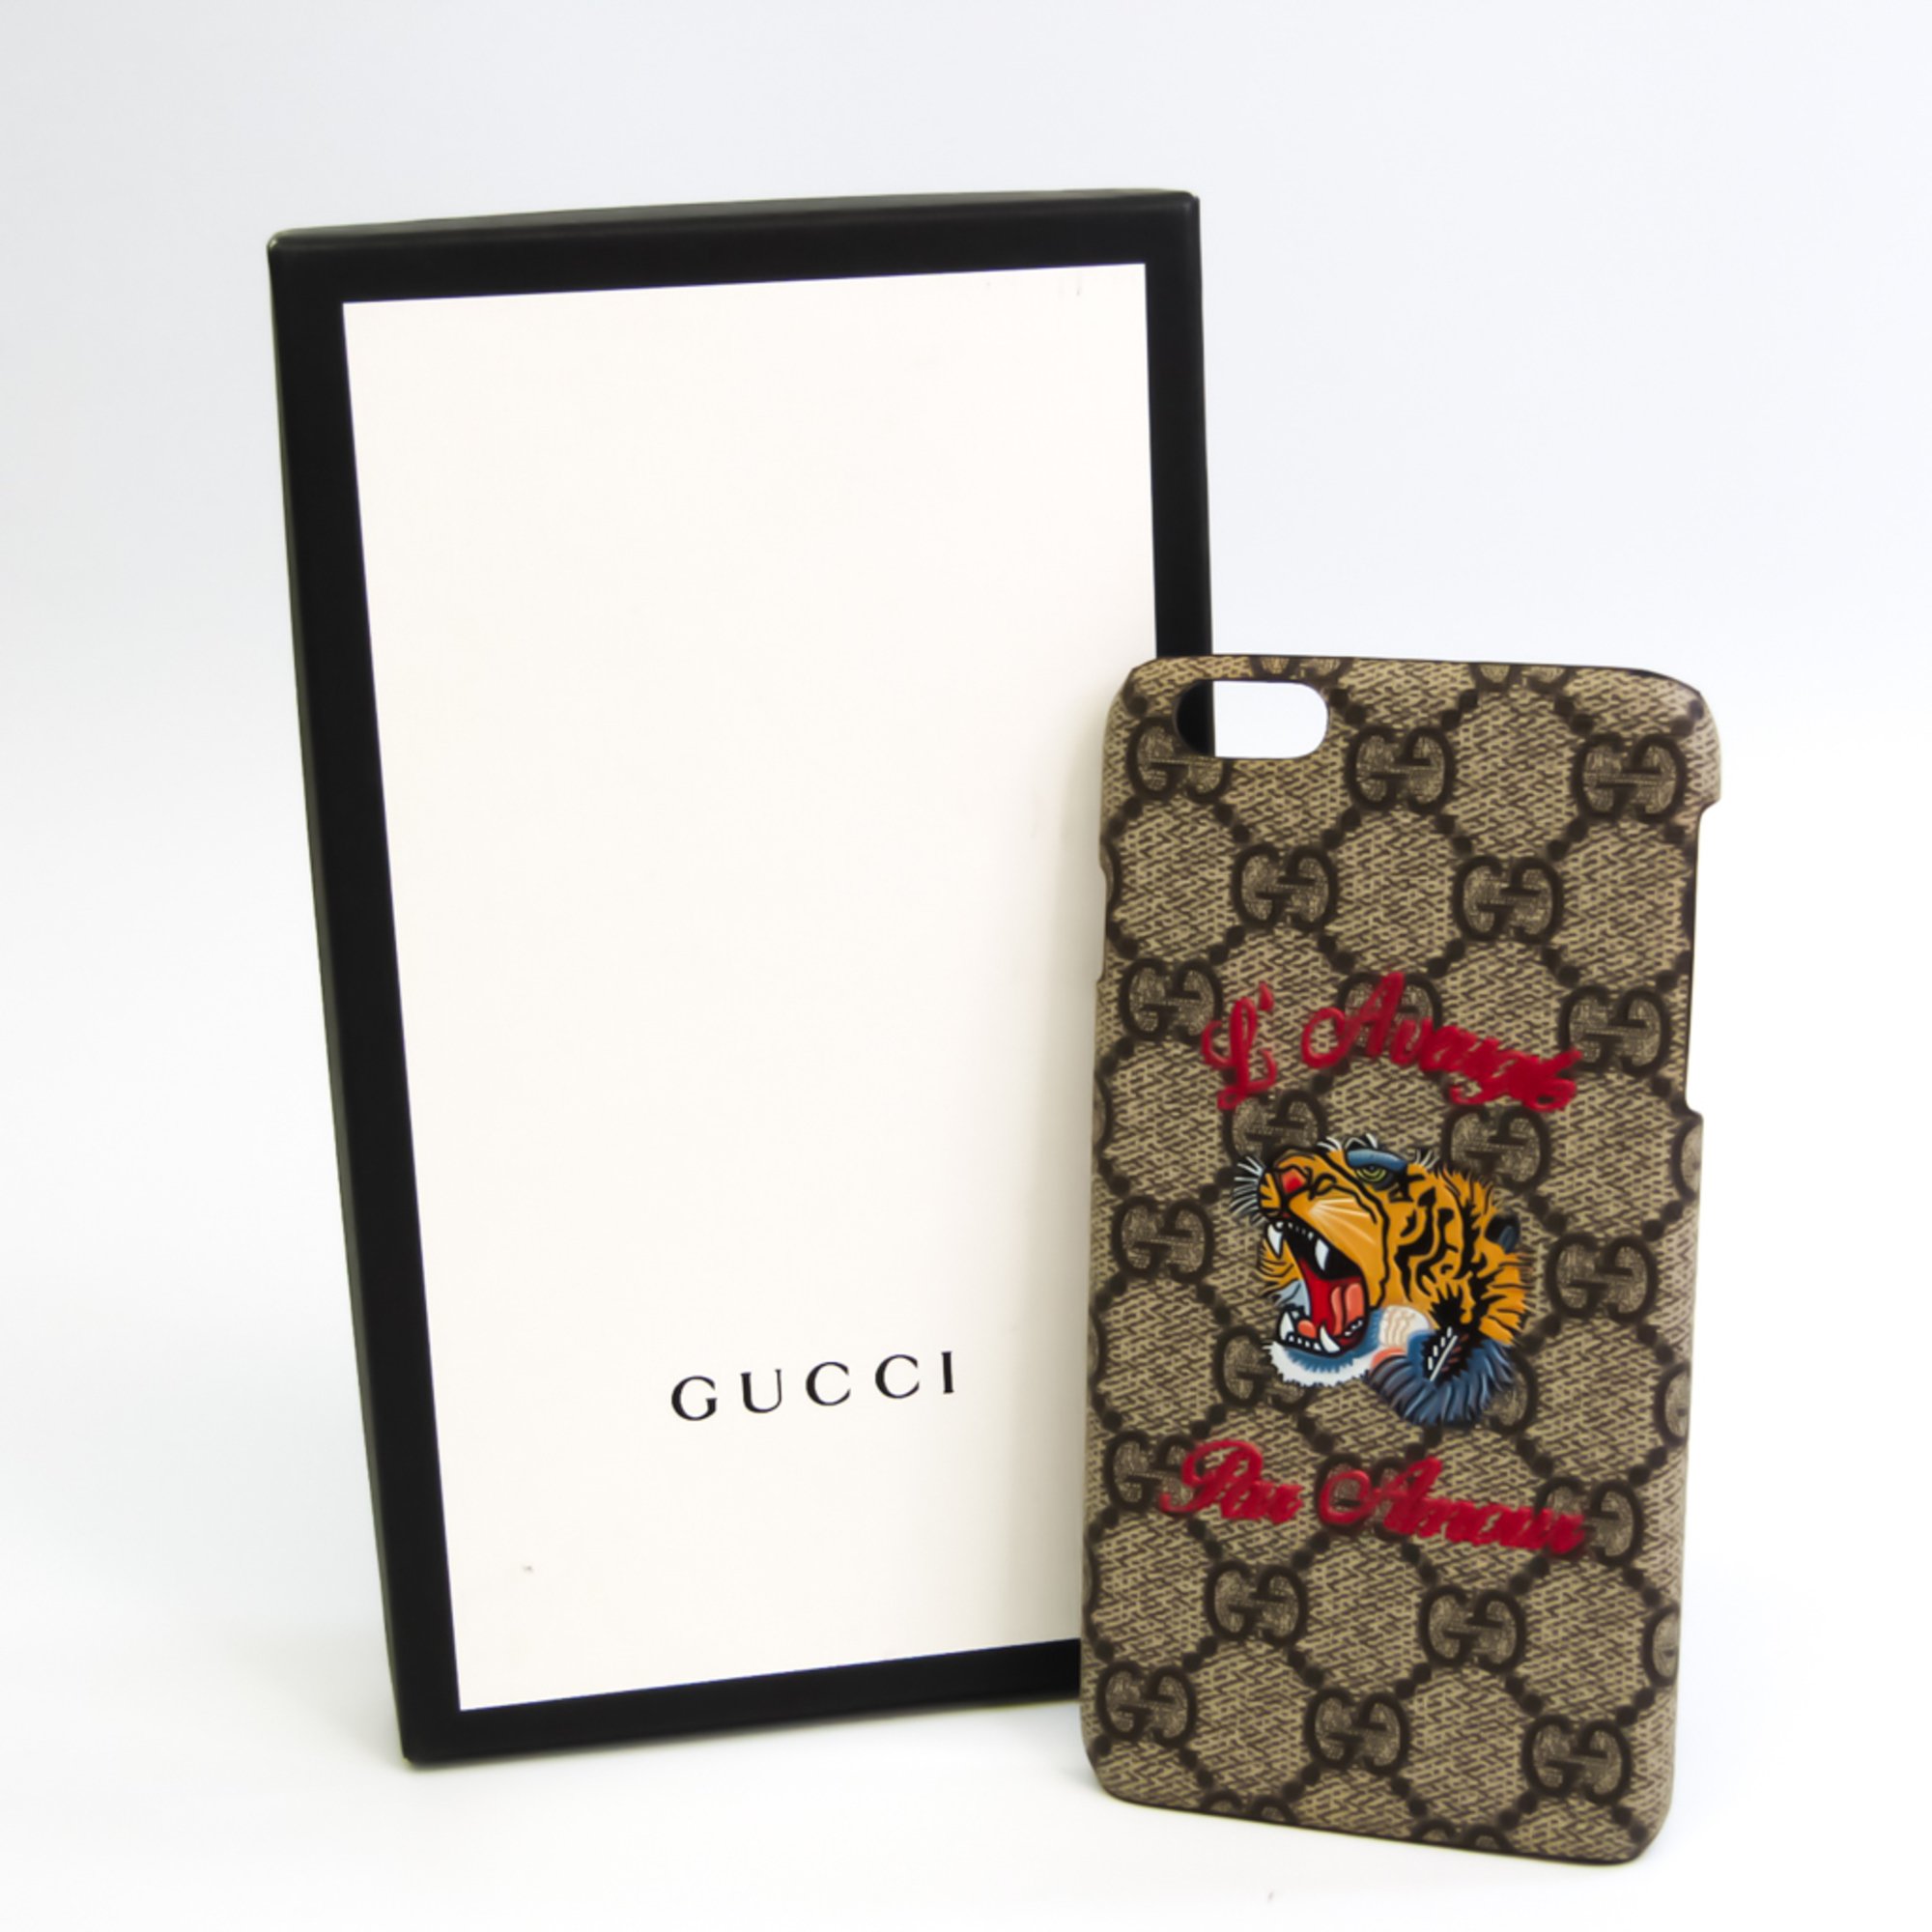 Gucci Coated Canvas Phone Bumper For IPhone 6 Plus Beige GG Supreme